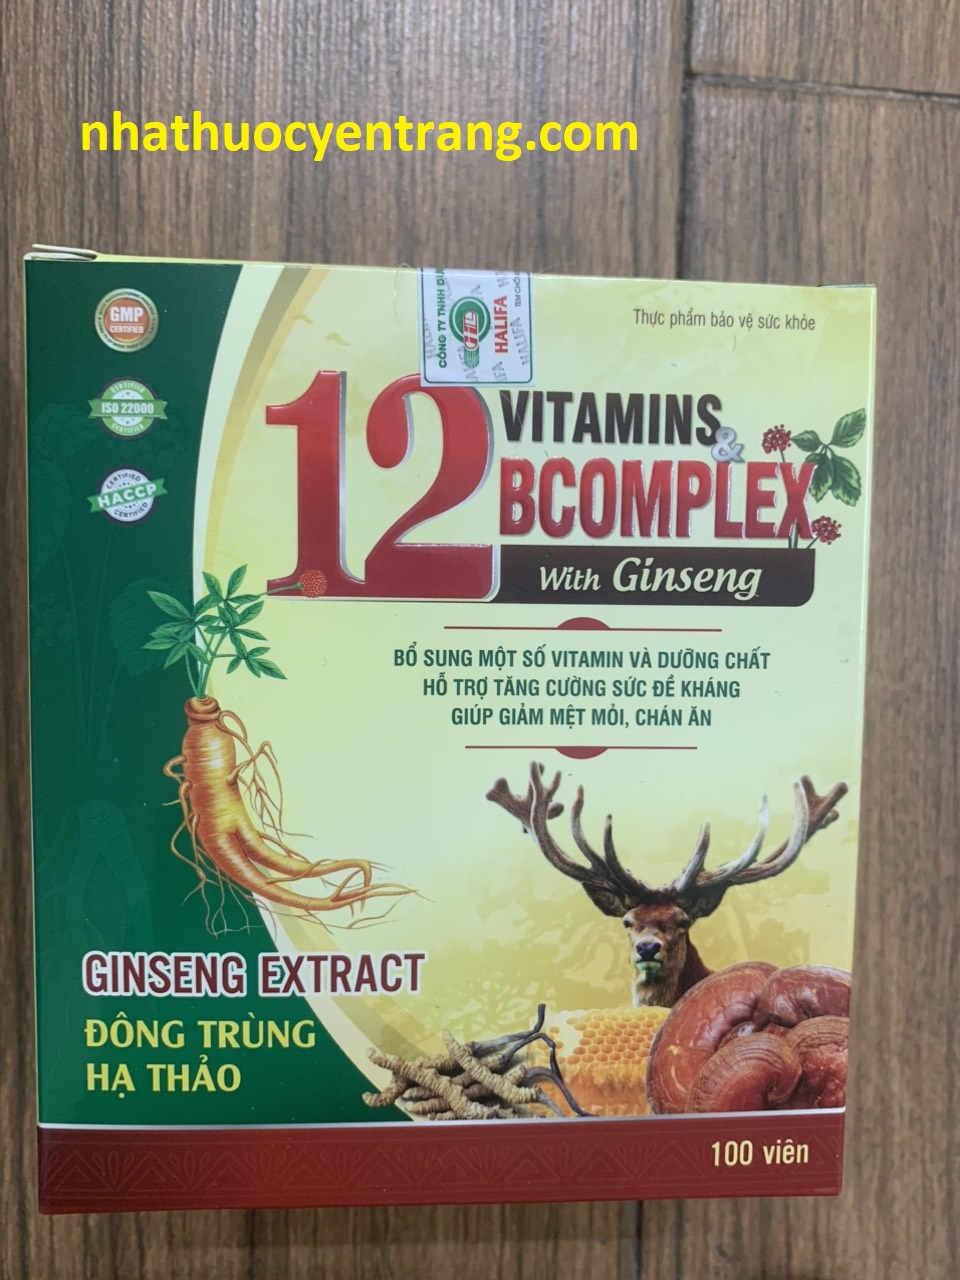 Vitamins 12B complex with ginseng